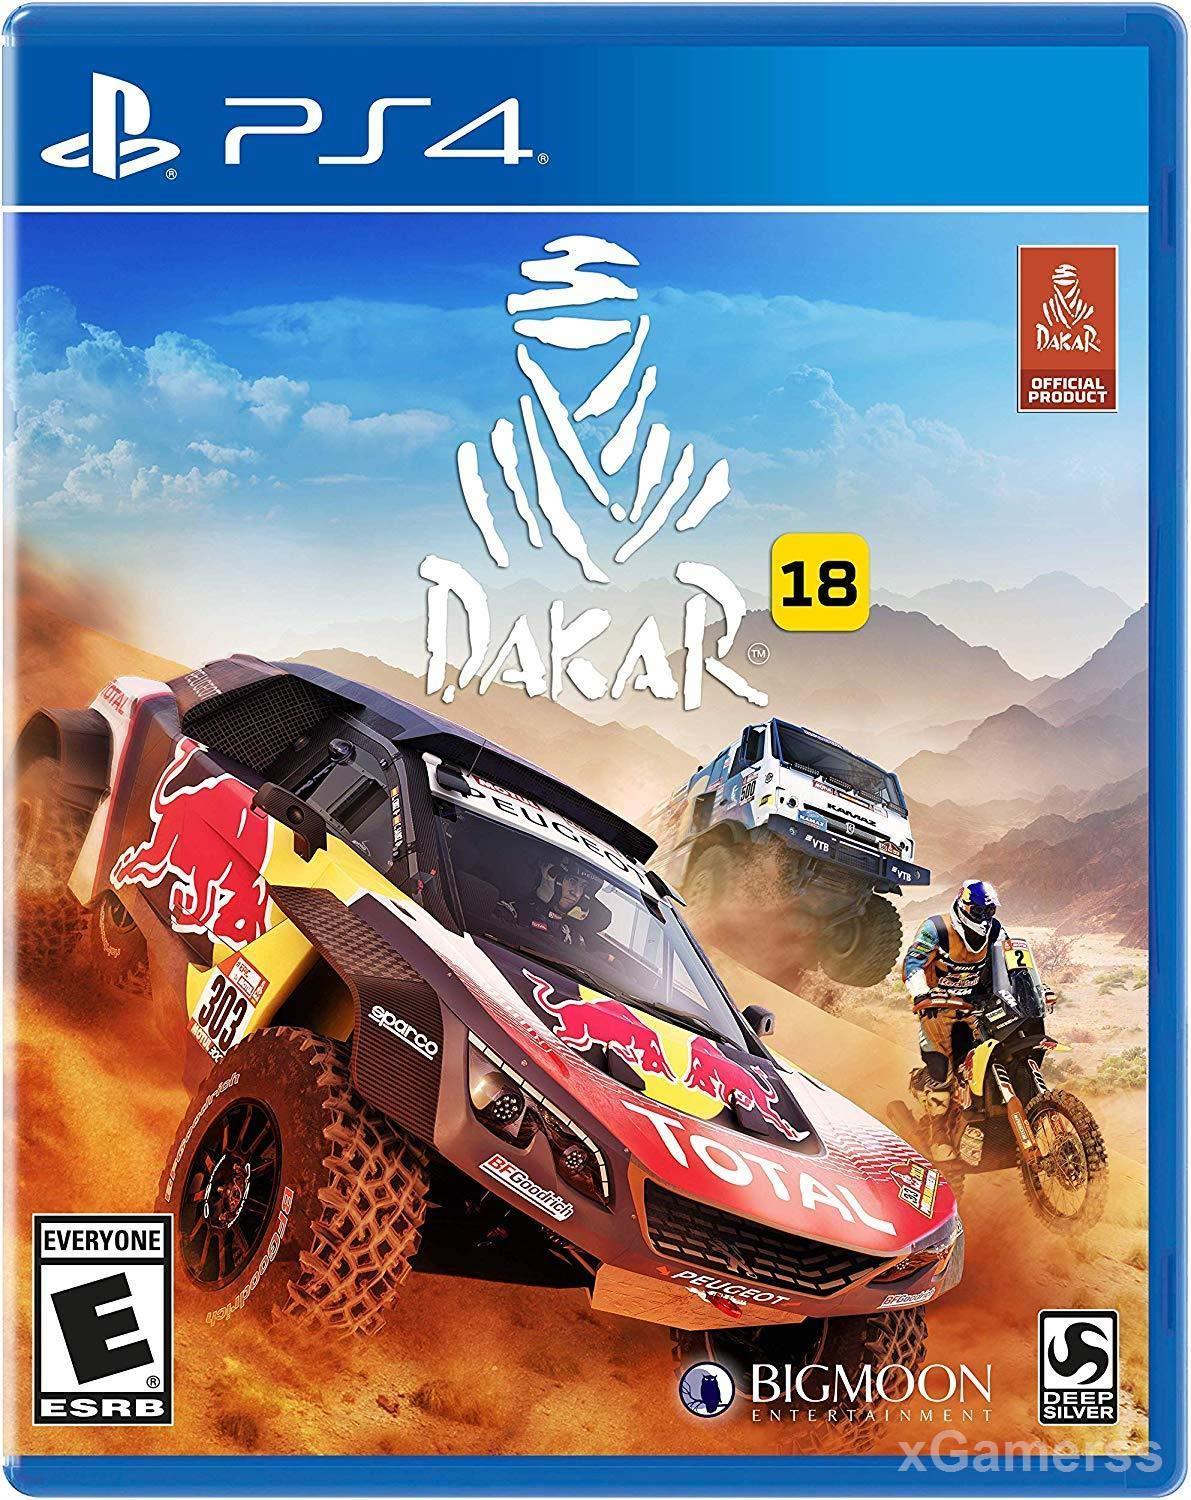 Dakar 18 - this great race for crossing deserts and mountains